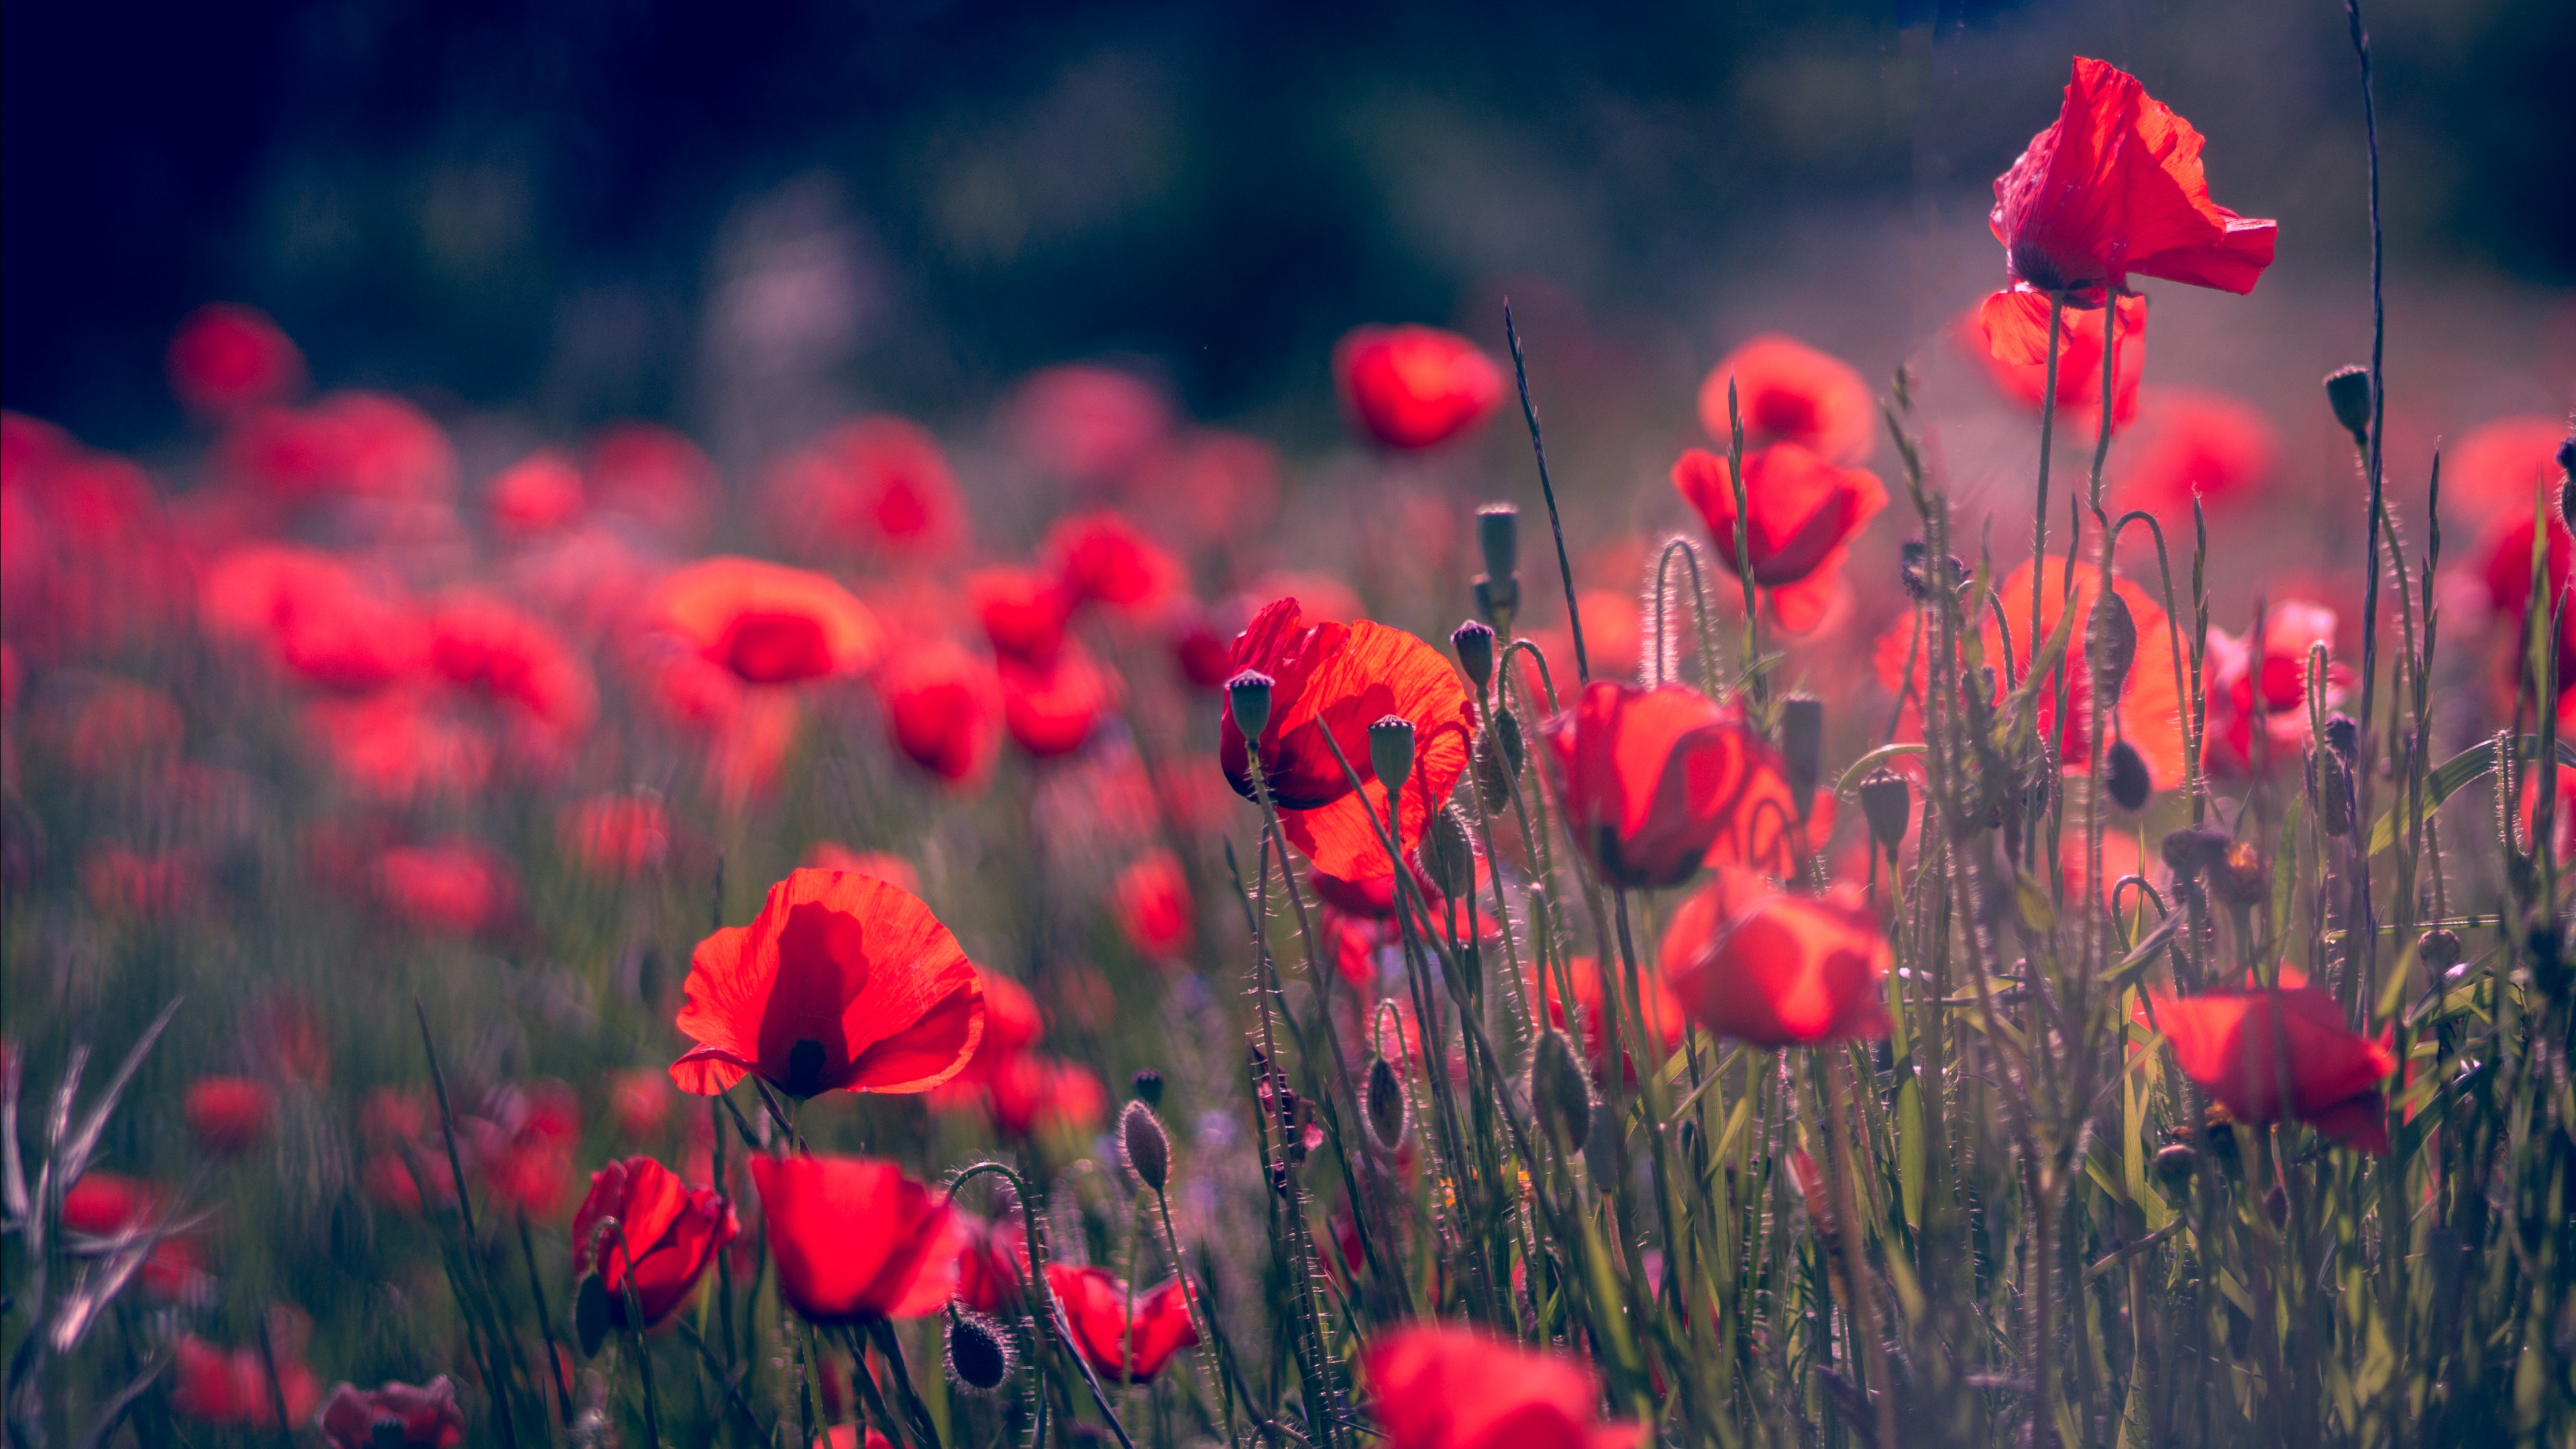 Cool Poppy Red Flowers wallpaper  Download TOP Free wallpapers